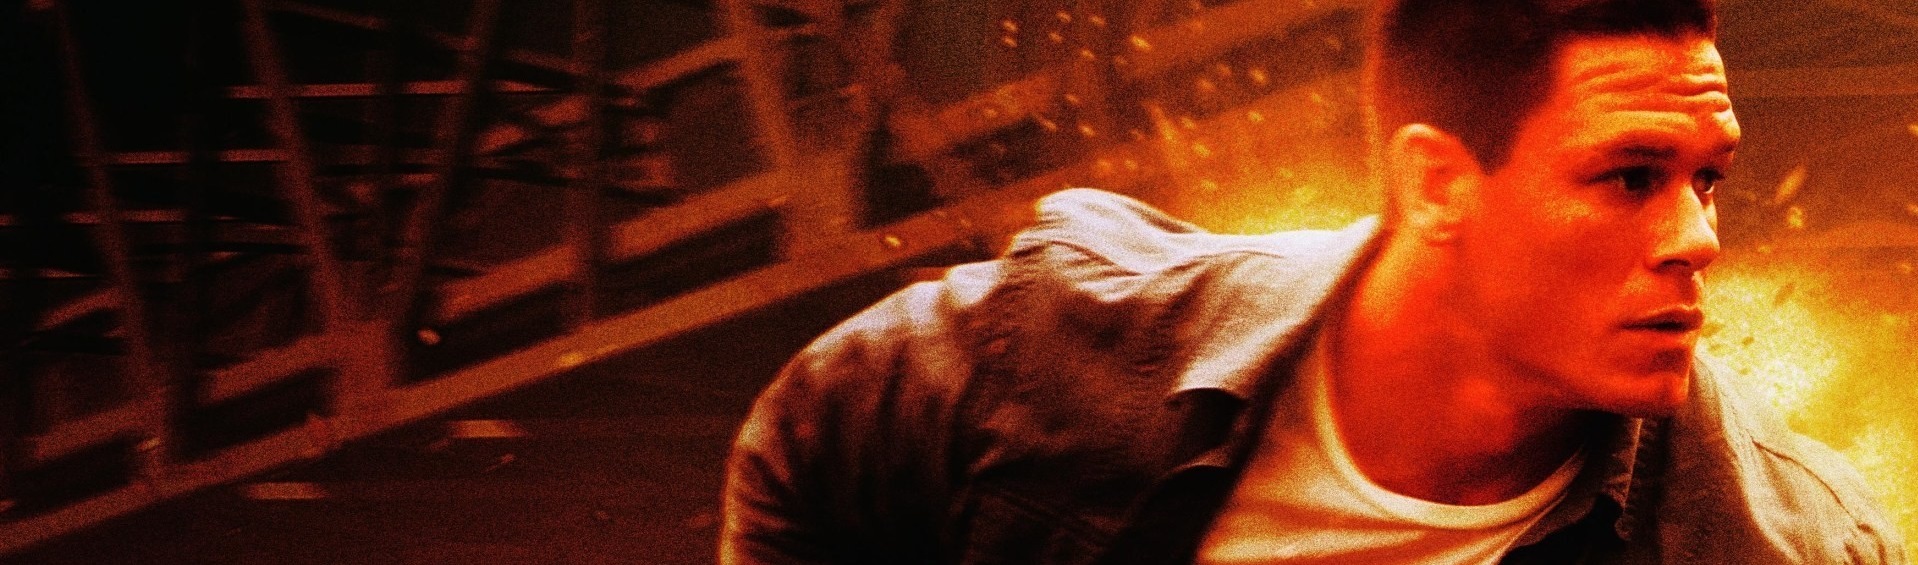 Archived: Review: 12 Rounds (2009) - archived